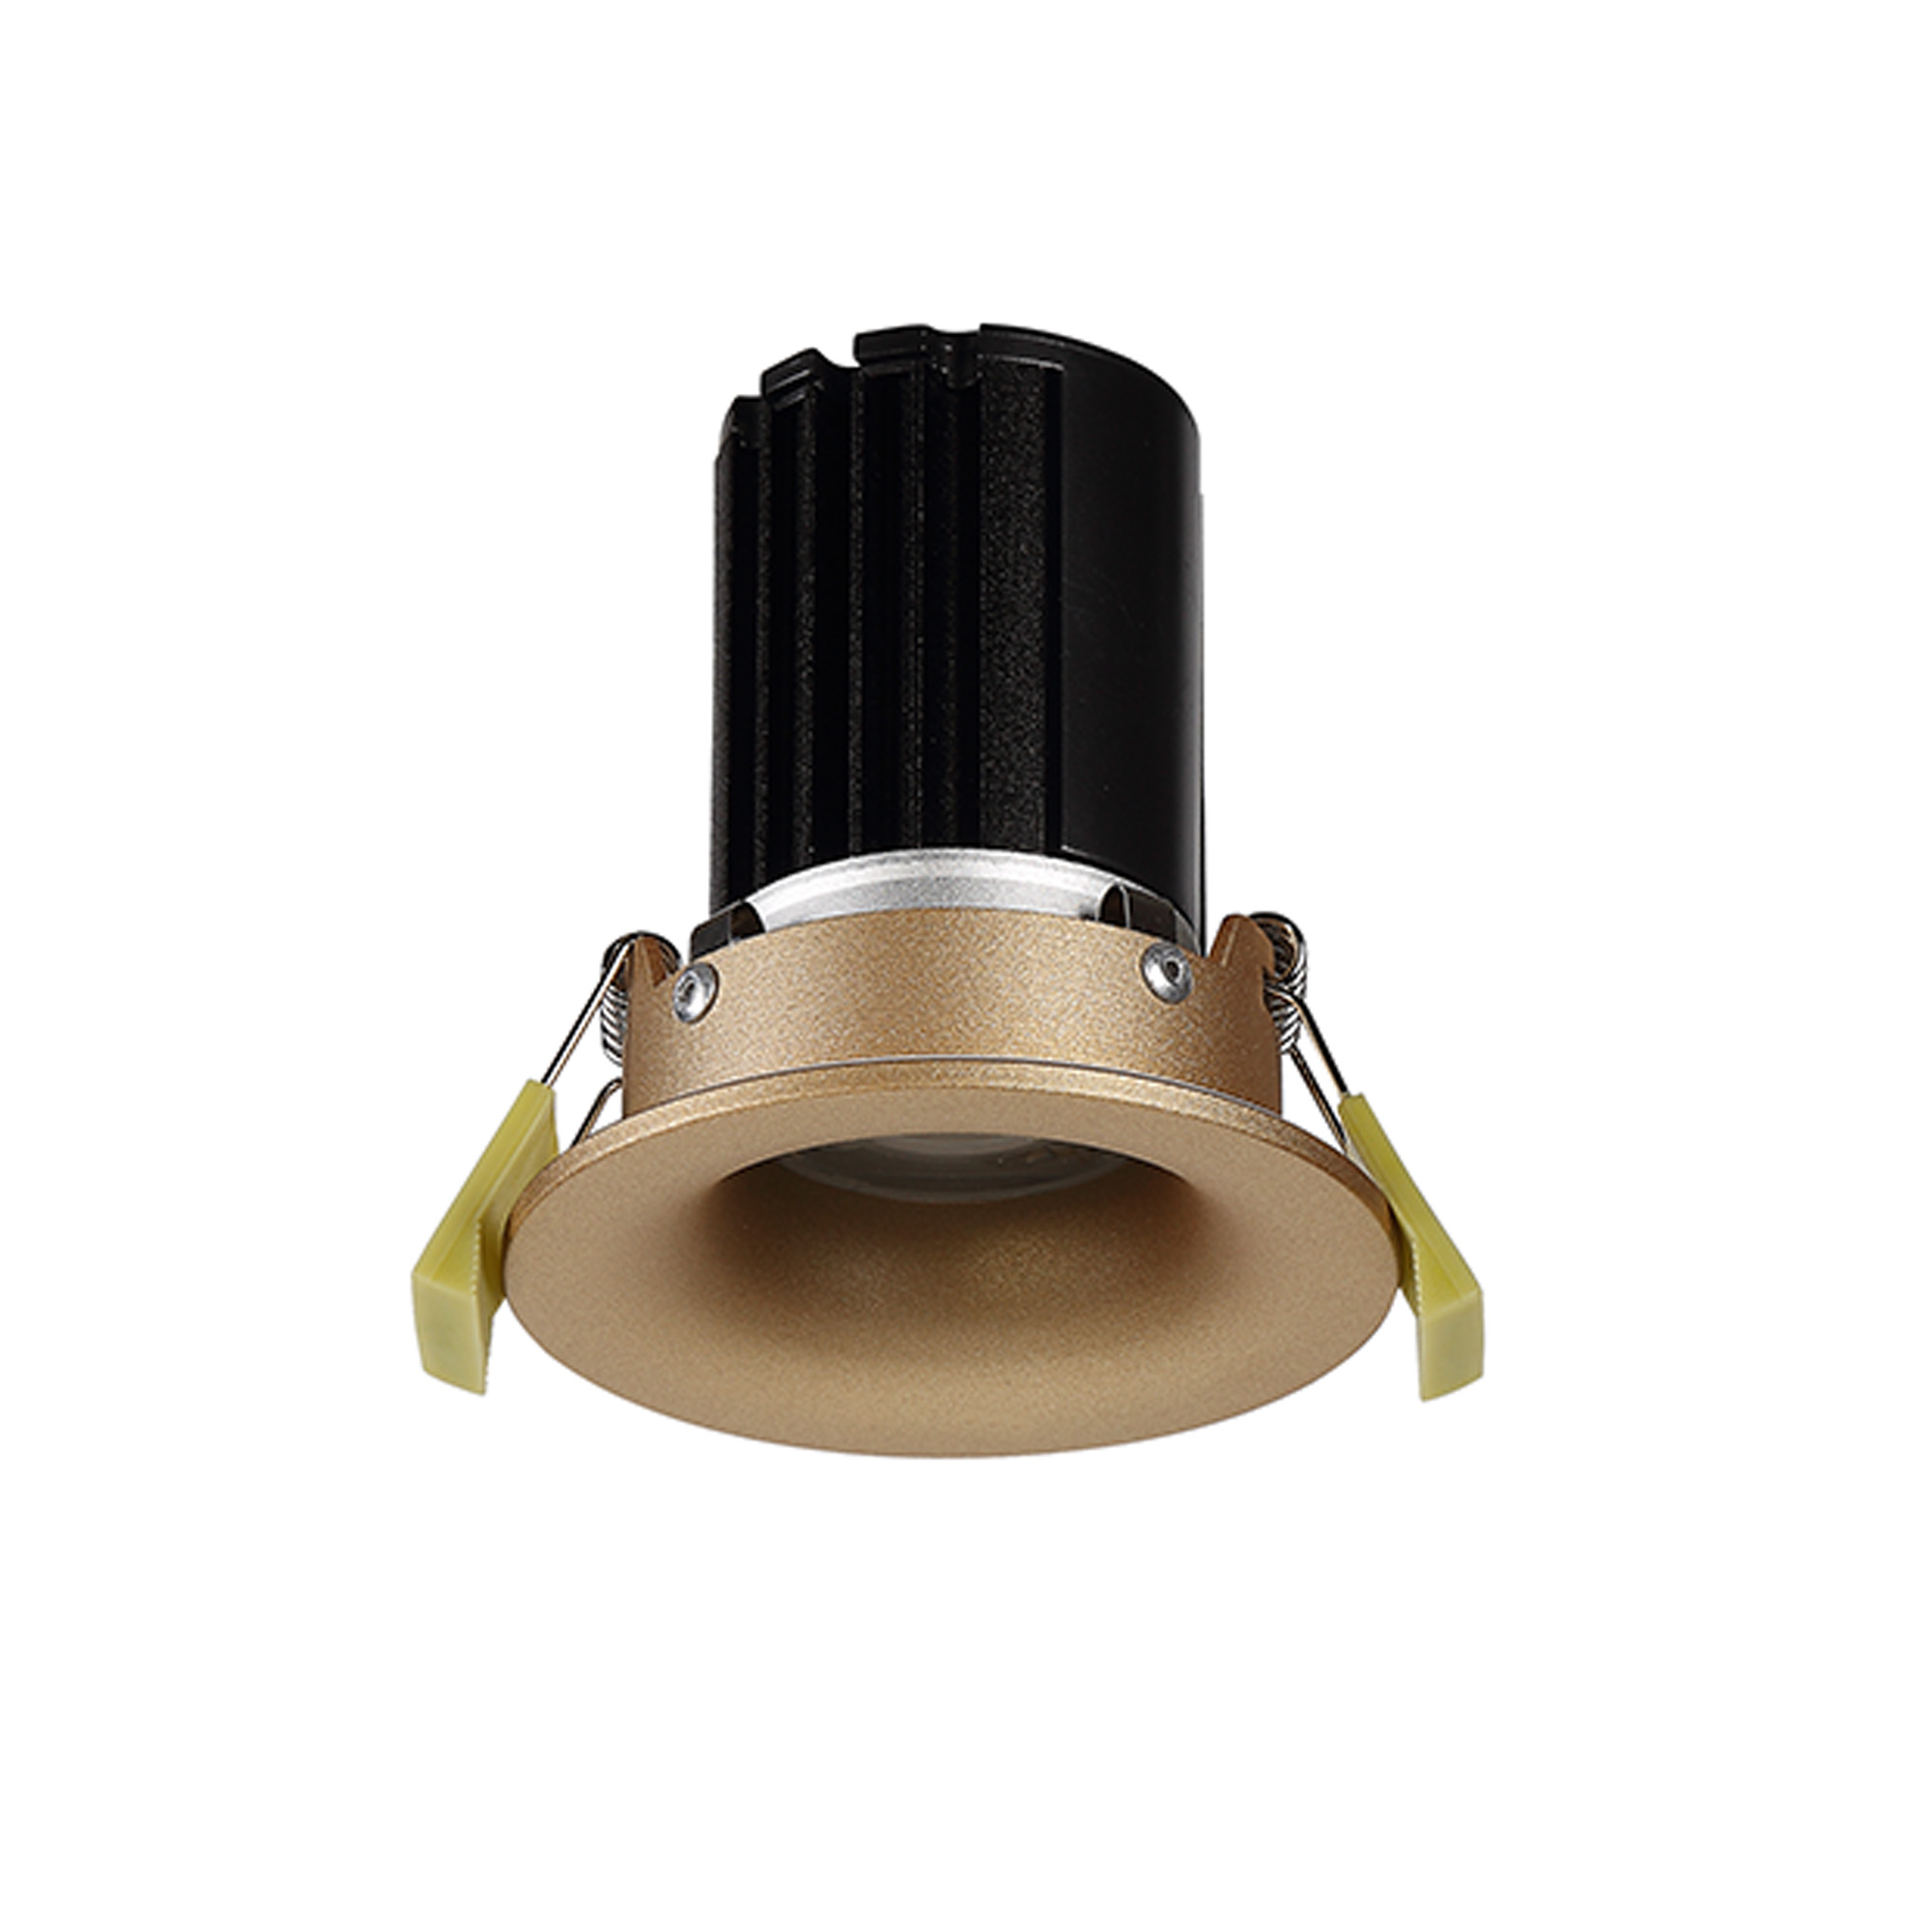 DM202497  Bruve 12 Tridonic powered 12W 3000K 1200lm 36° LED Engine;300mA ; CRI>90 LED Engine Champagne Gold Fixed Round Recessed Downlight; Inner Glass cover; IP65